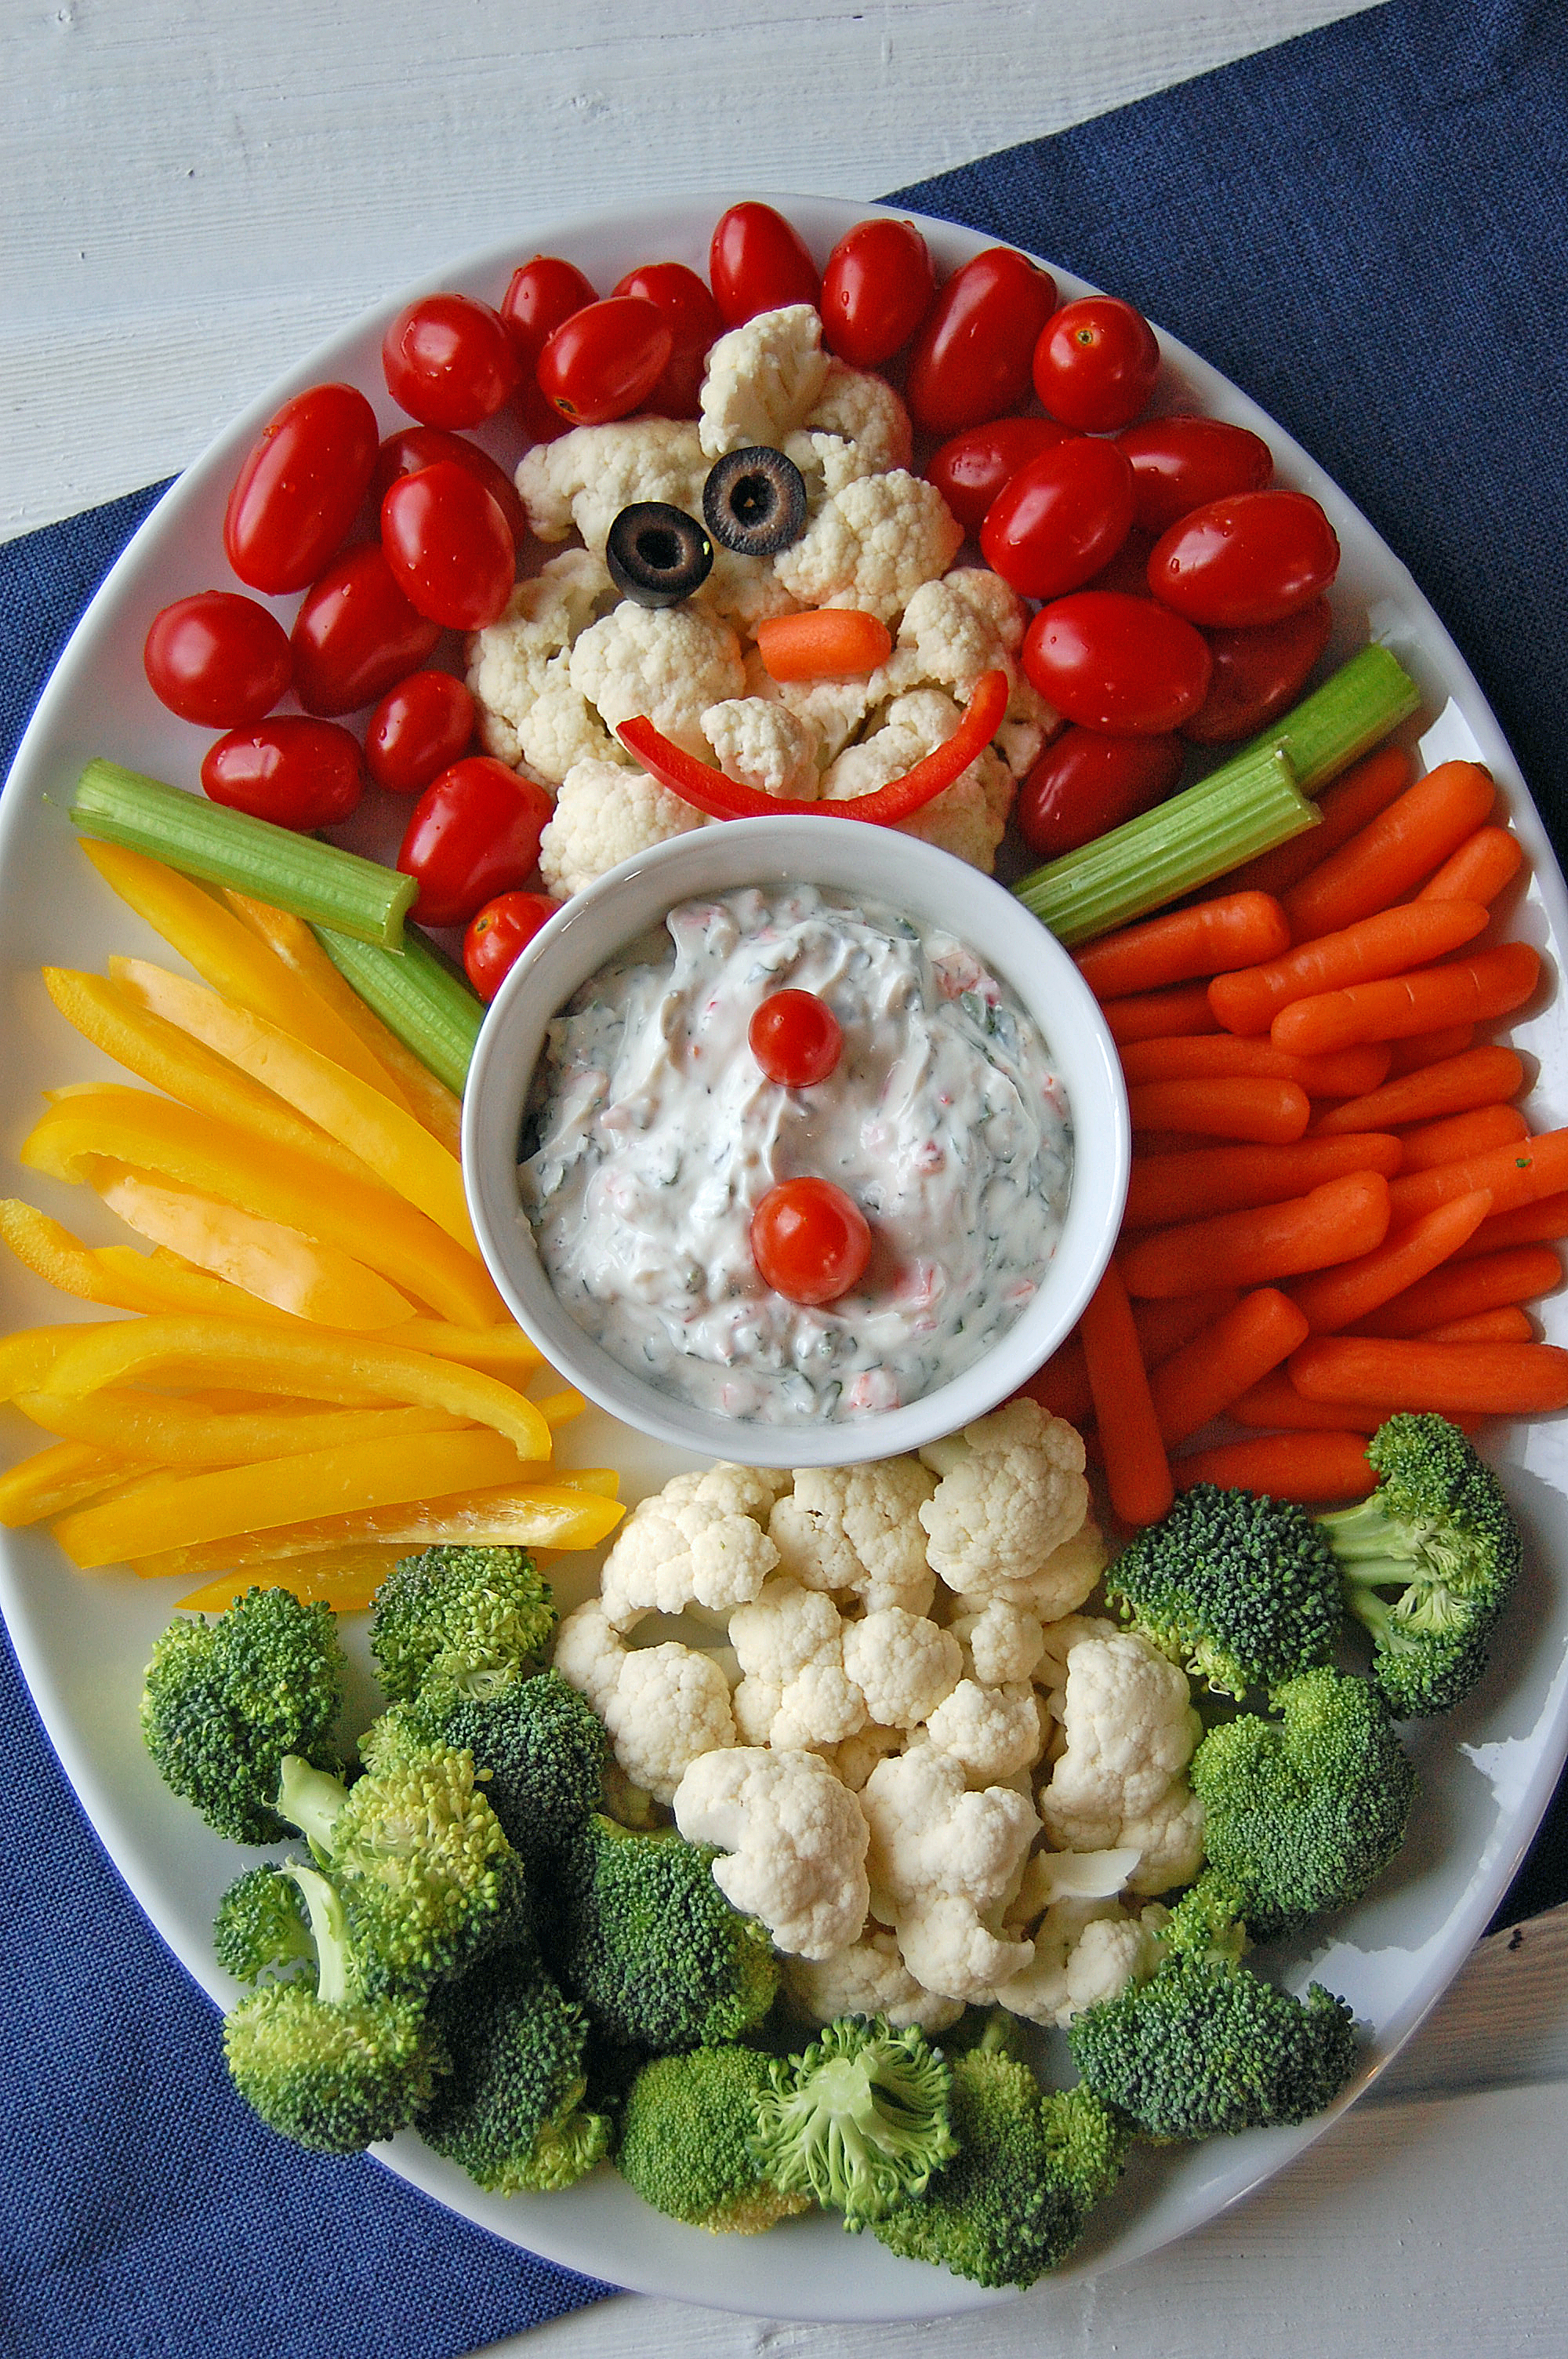 This snowman veggie platter makes a great contribution to a holiday potluck. (NDSU photo)